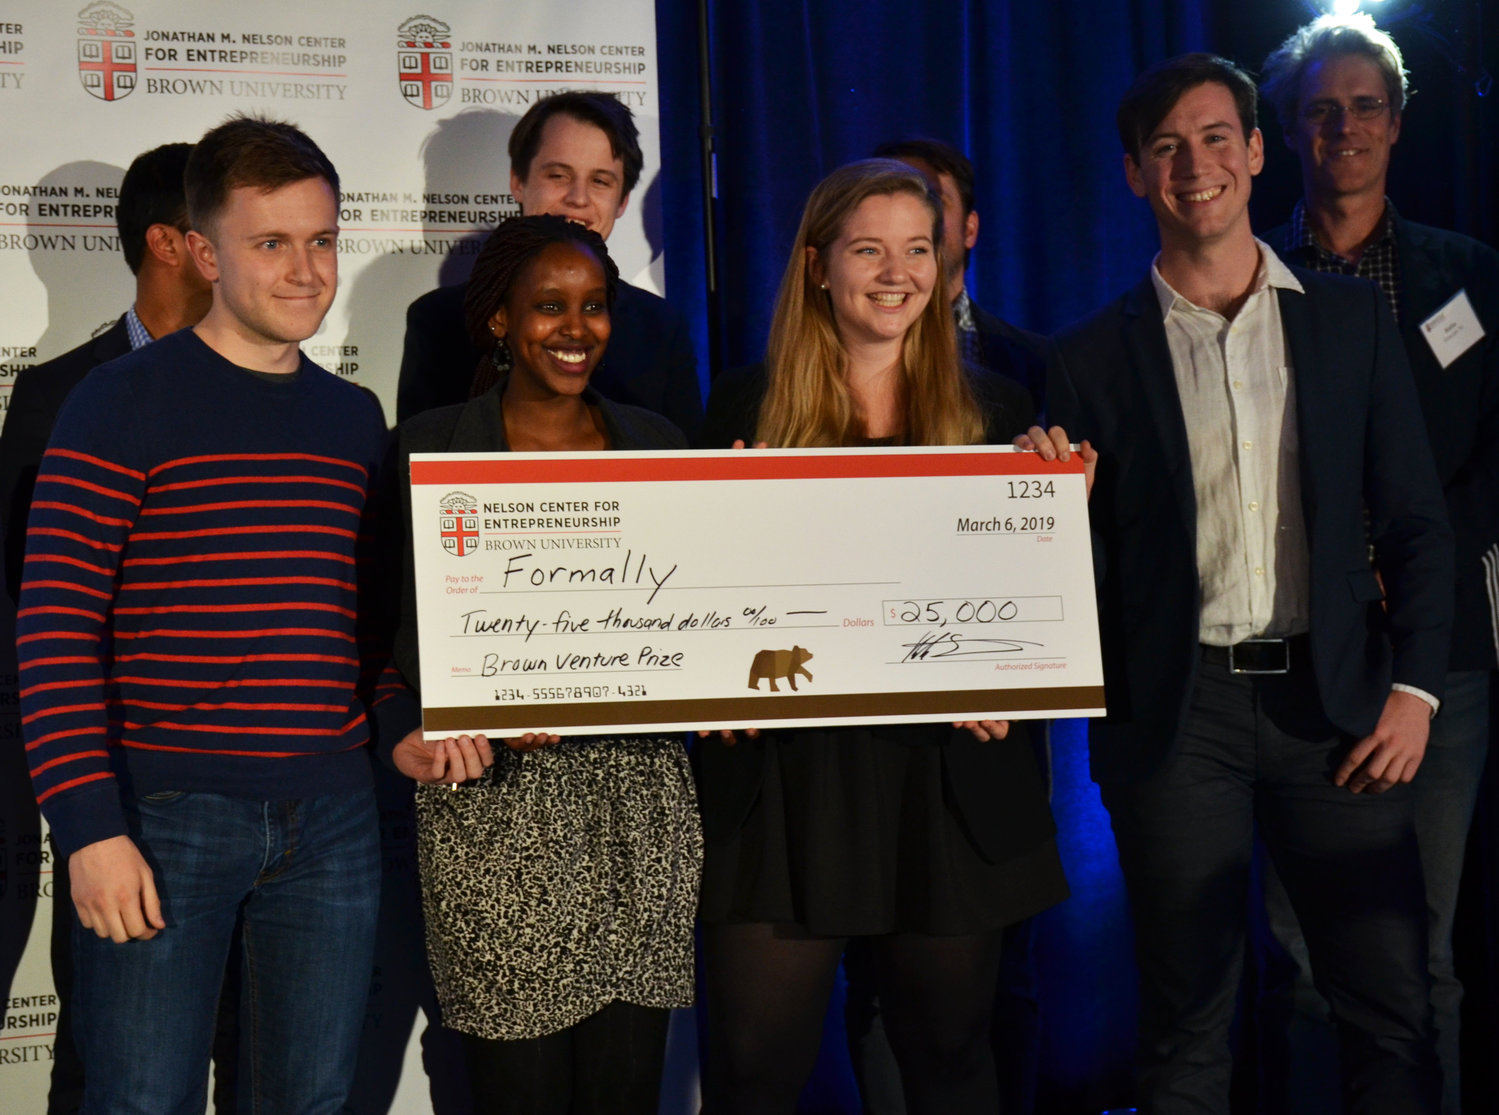 The entrepreneurial team for Formally won the first prize of $25,000 at the Brown Venture Prize Pitch Night on March 6.